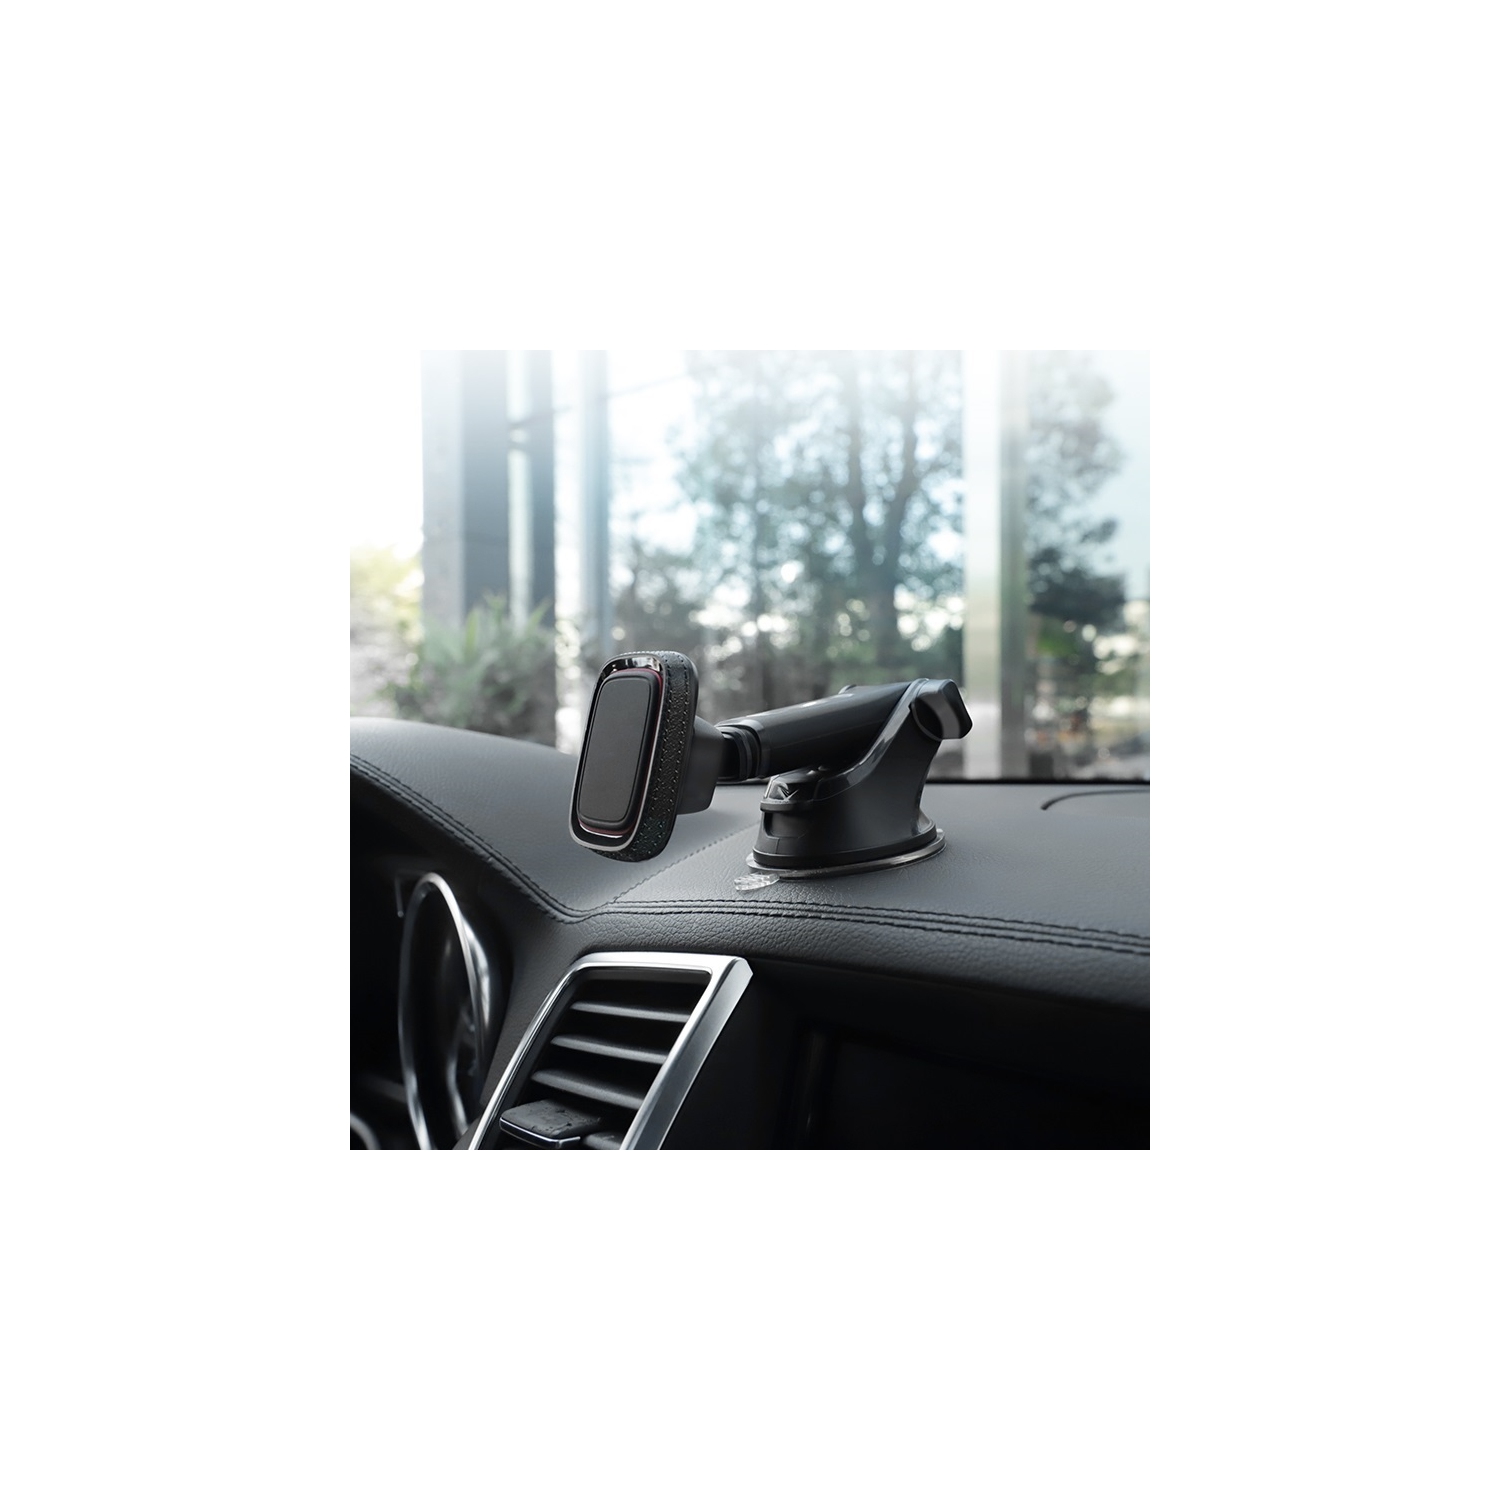 Universal Dashboard / Windshield Magnetic Sticky Suction Cup Car Cell Phone Mount Holder for iPhone Samsung Smartphones